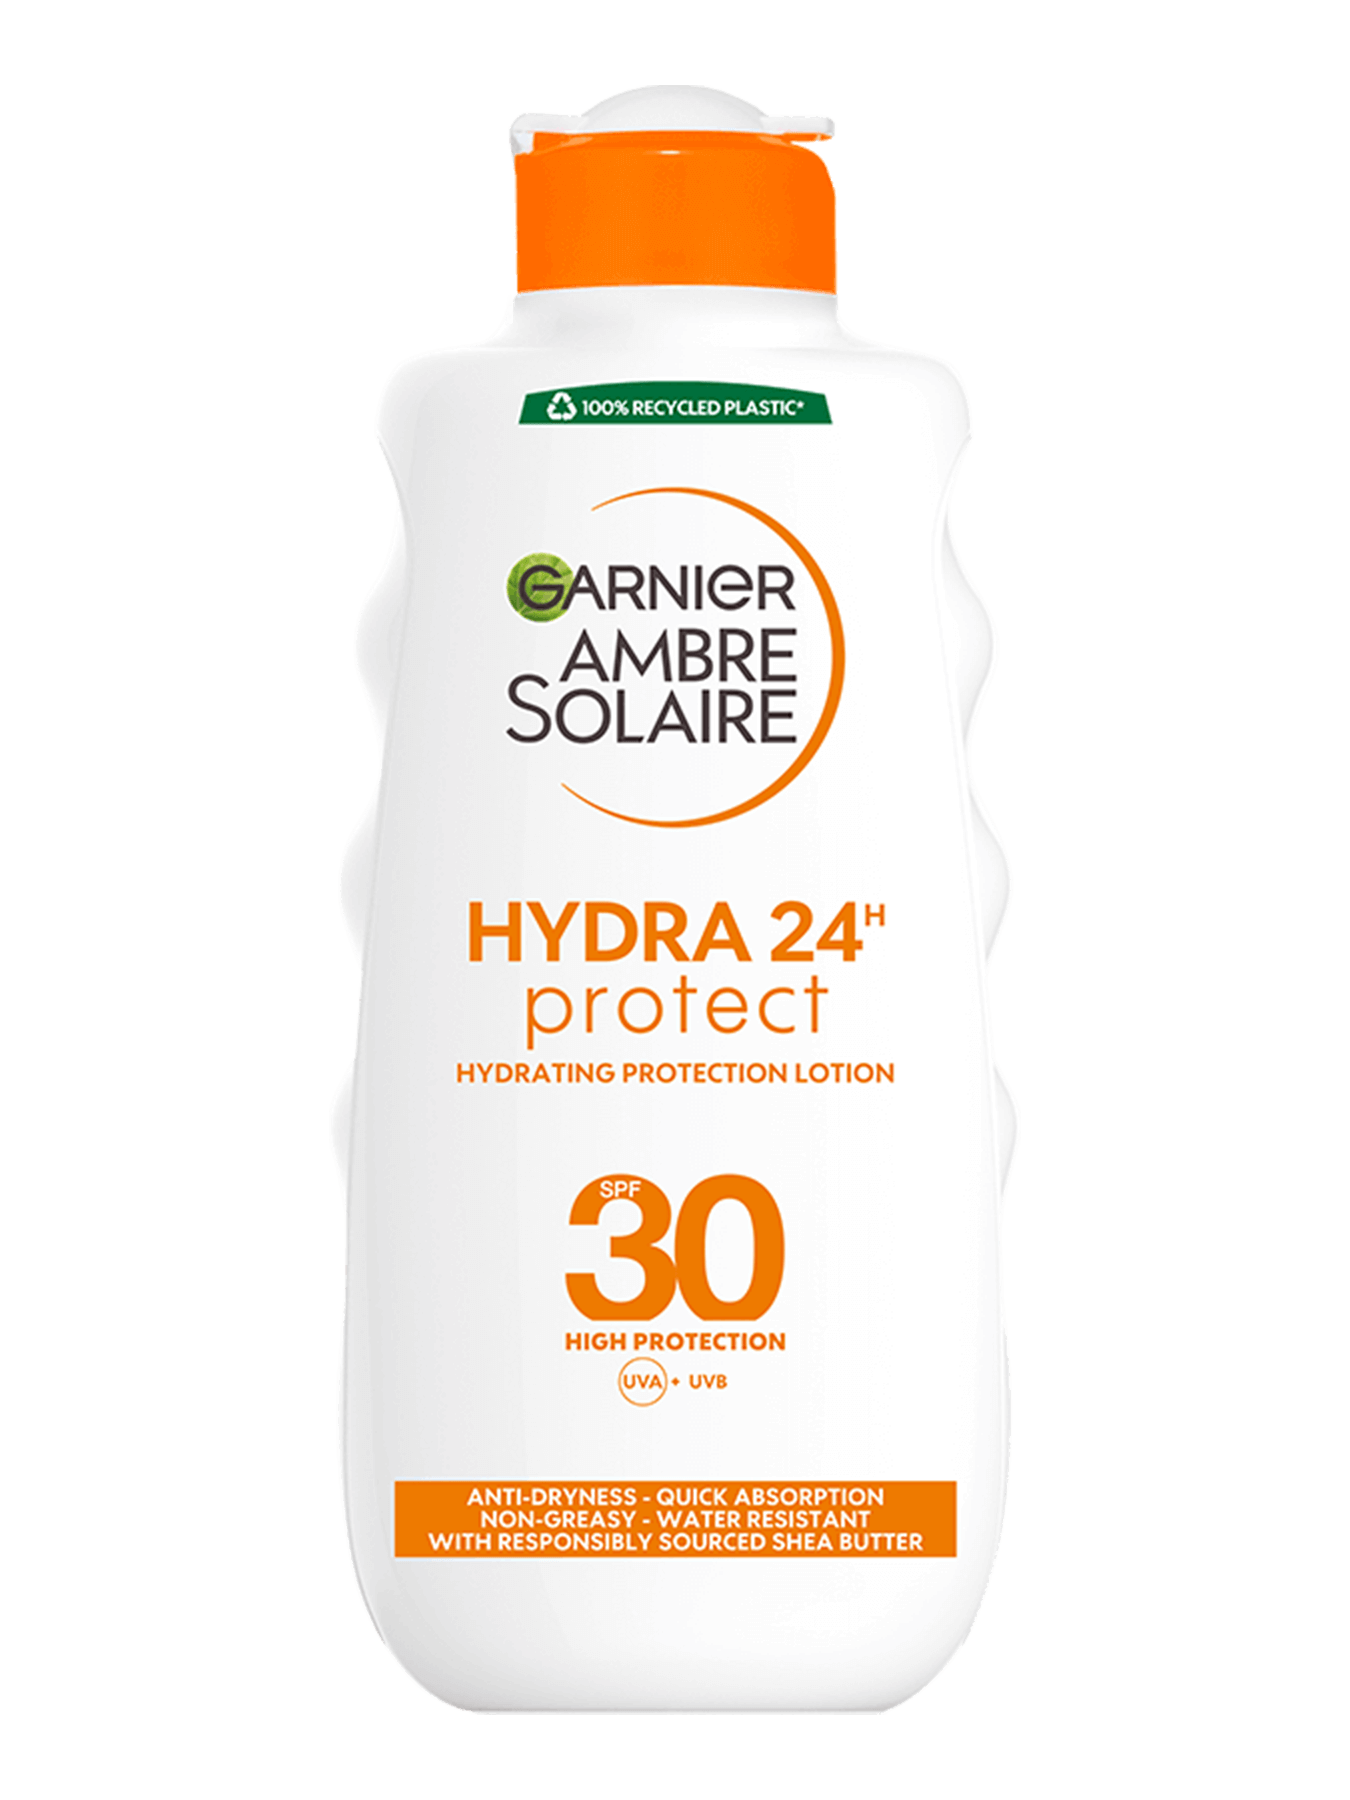 GAR Ambre Solaire Hydra Protect 24 Lotion spf30 200ml 2021 front (1)